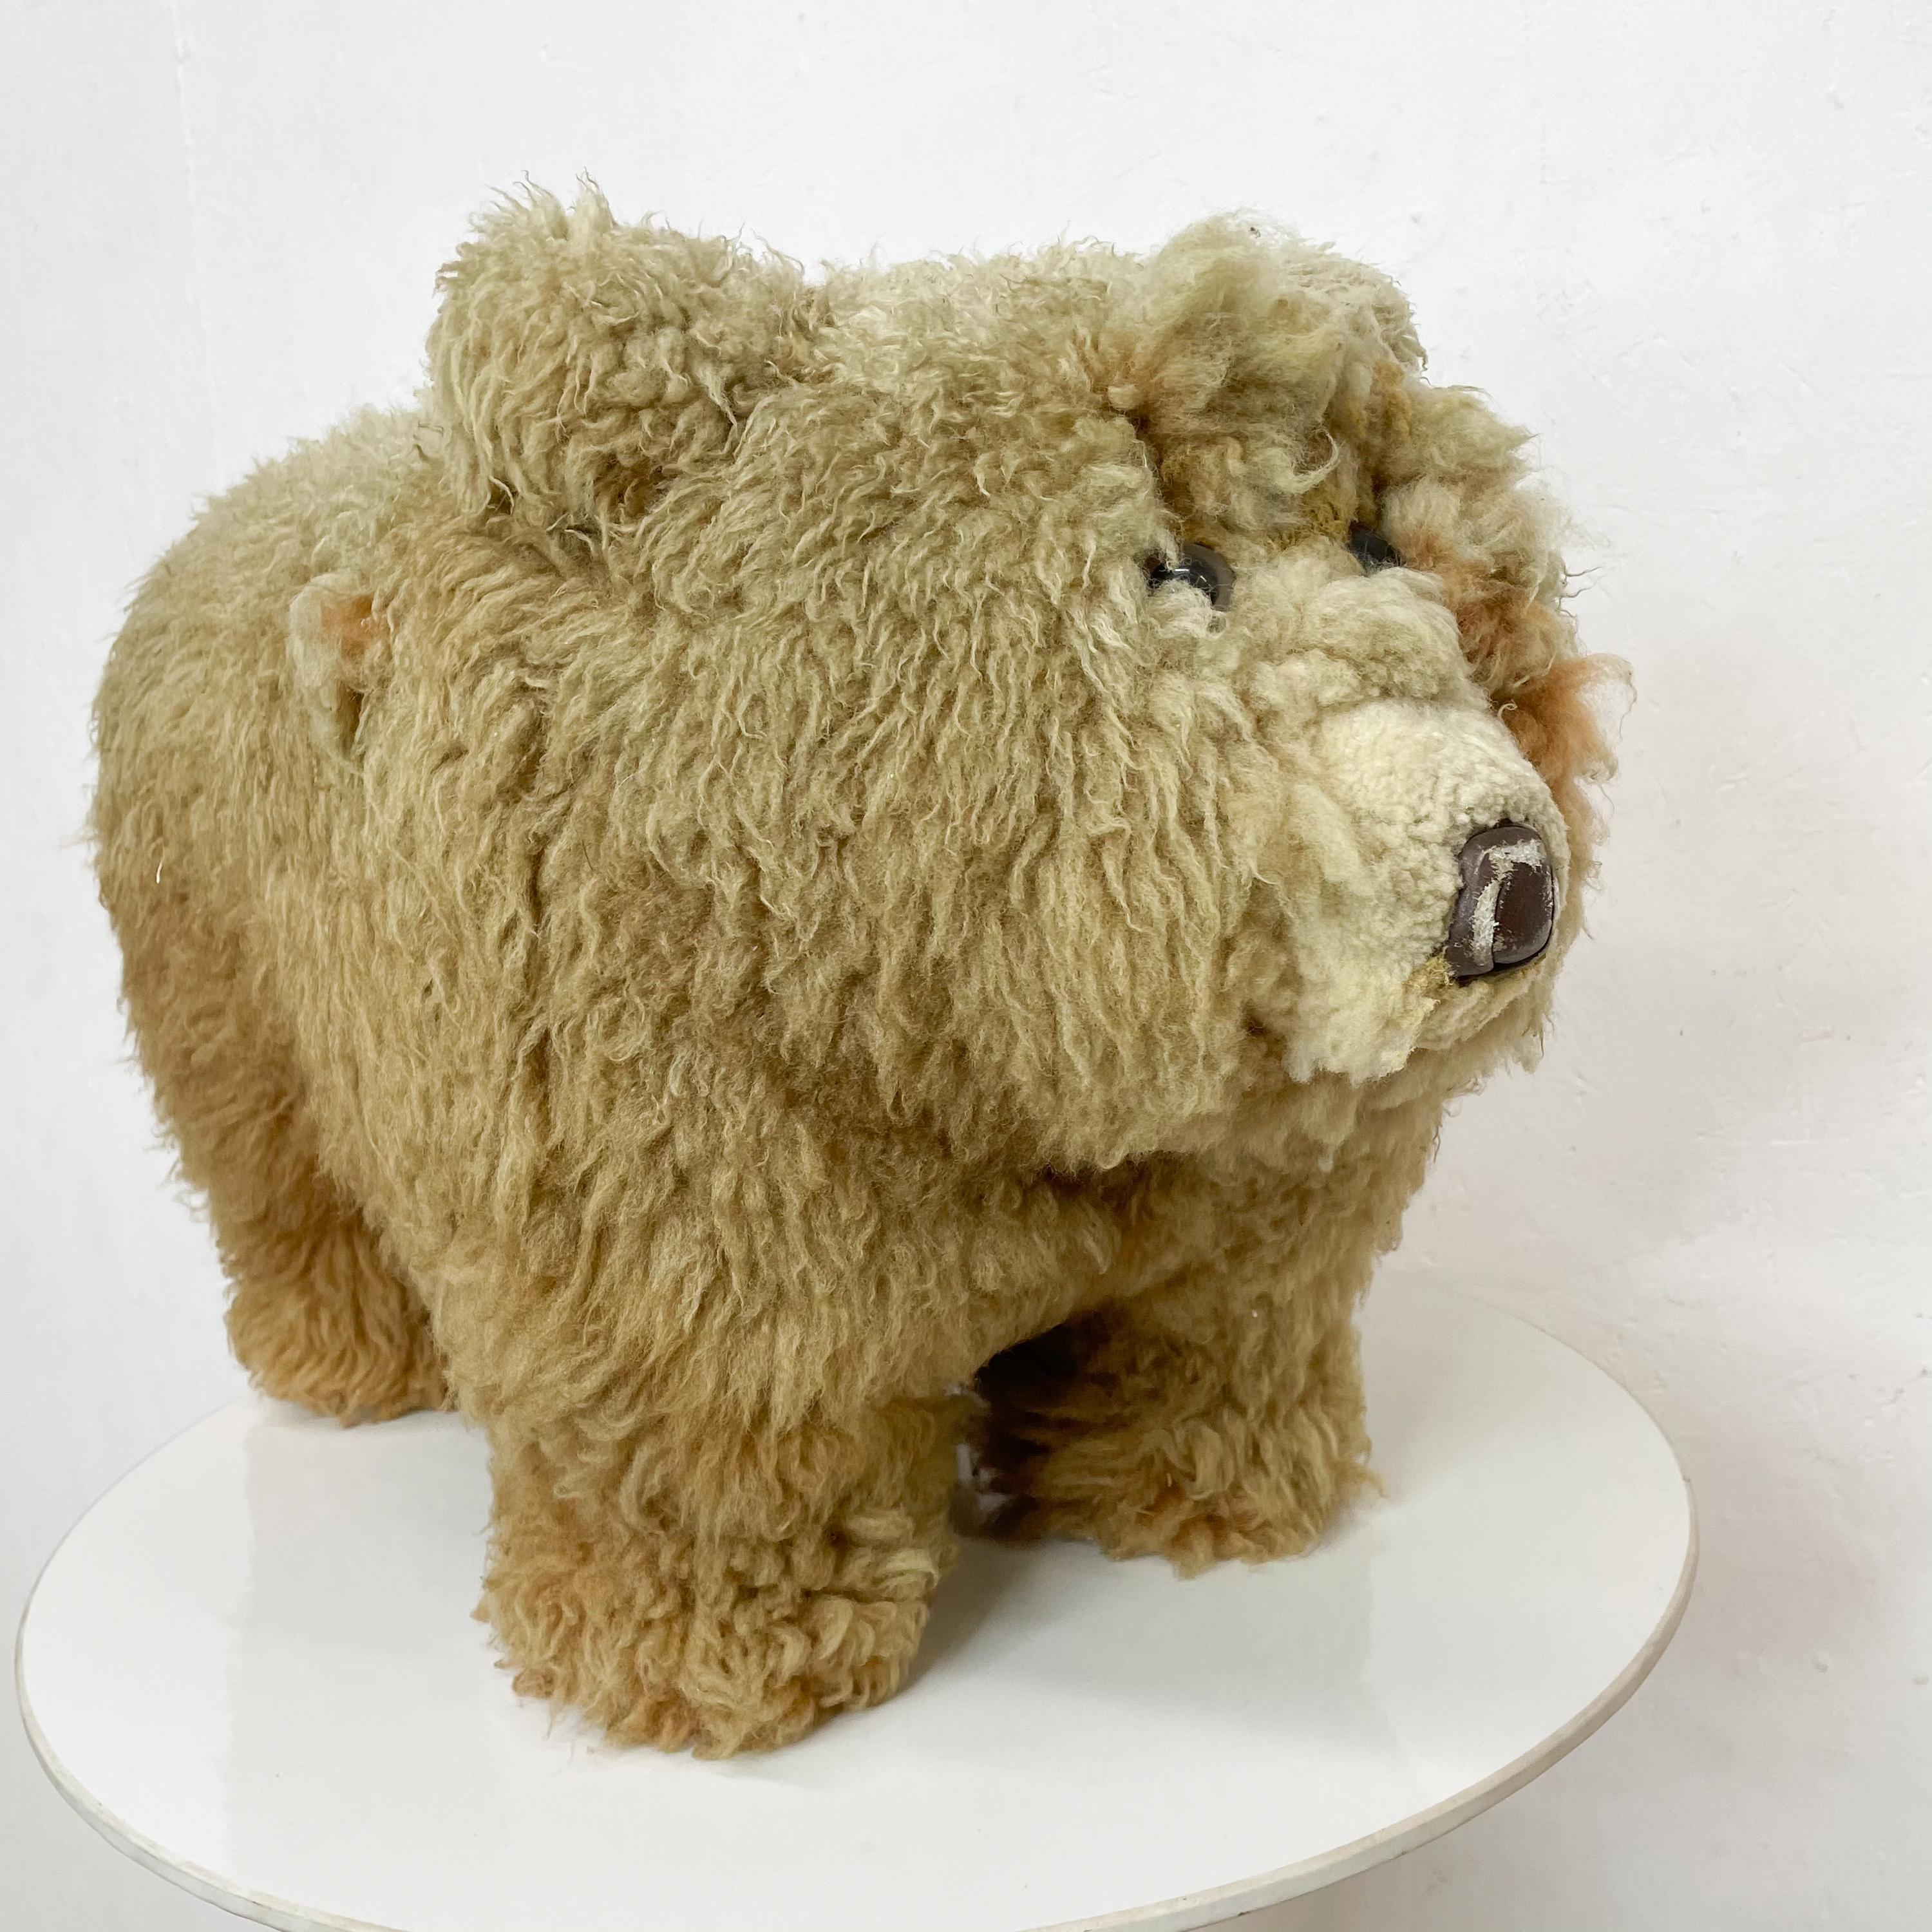 American Park Ave Scully & Scully Plush BEAR Lambs Wool Foot Stool Ottoman 1950s Luxury